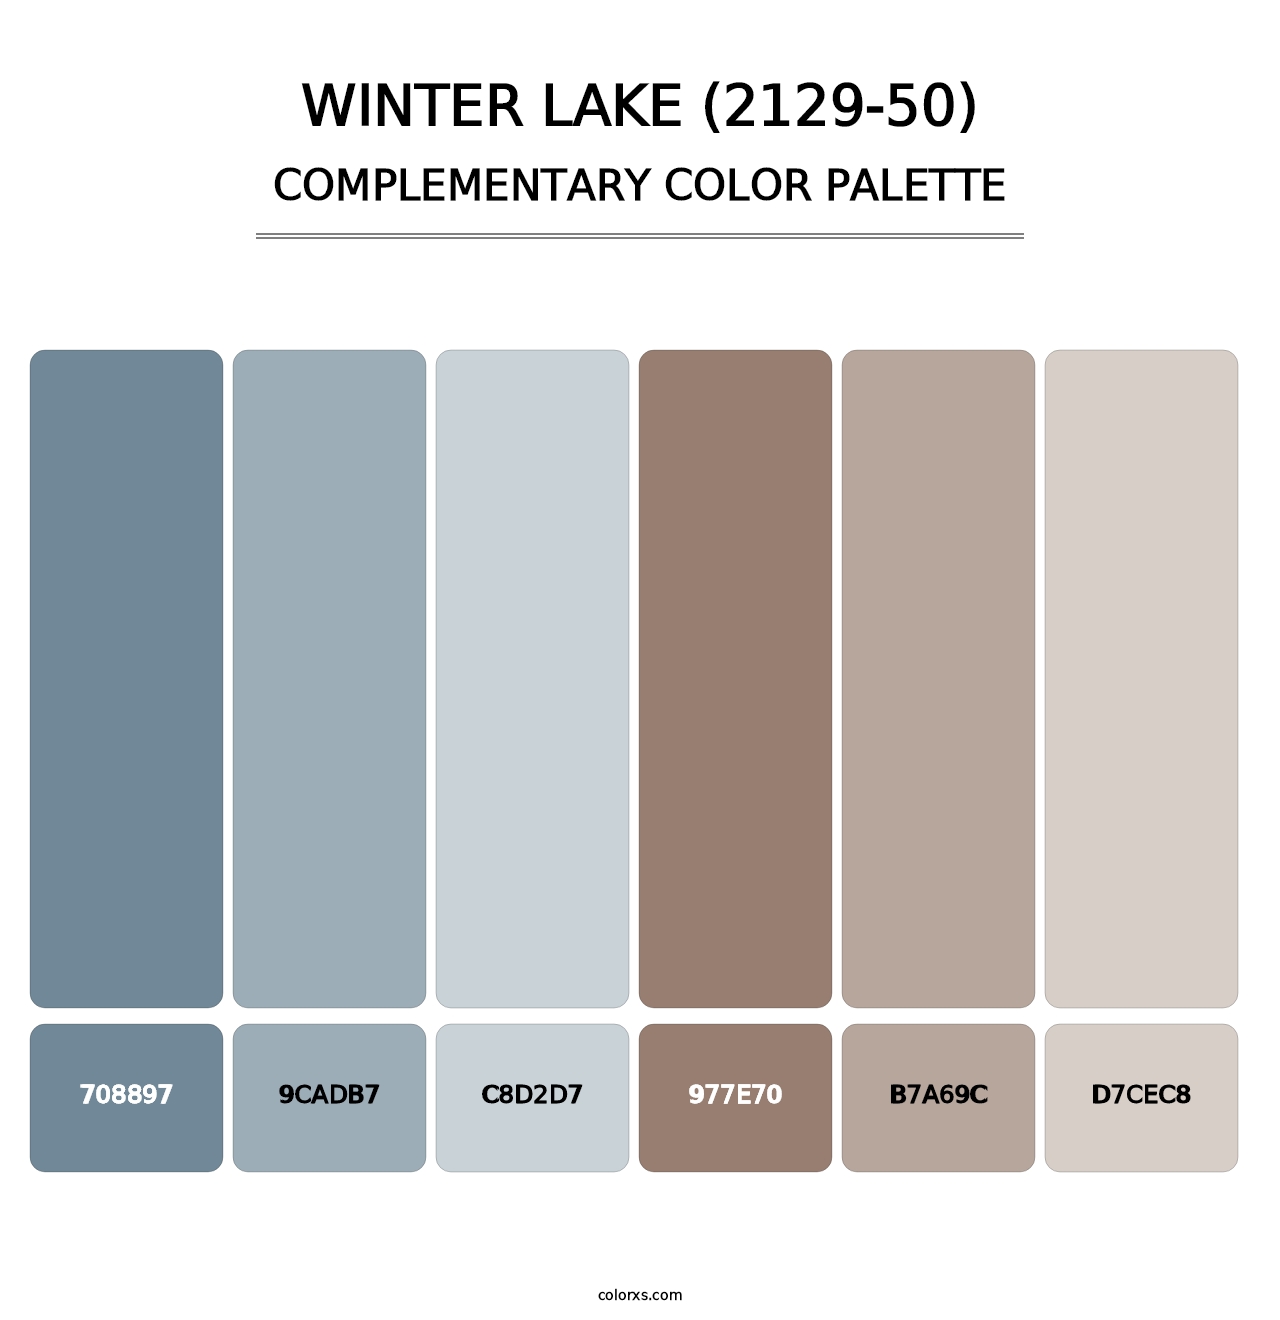 Winter Lake (2129-50) - Complementary Color Palette